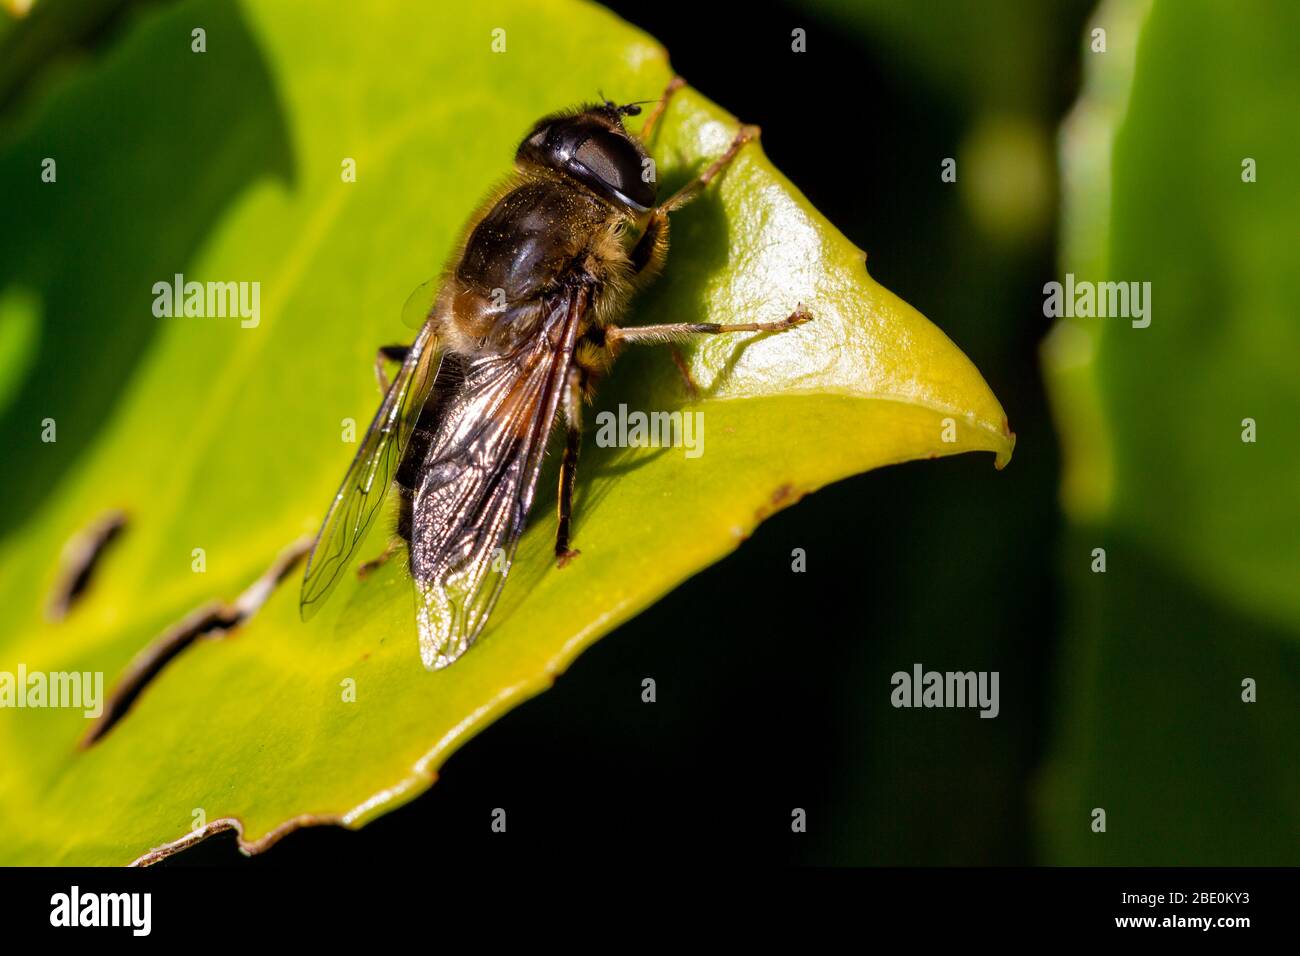 Closeup of Honey Bee on a Green Leaf Stock Photo